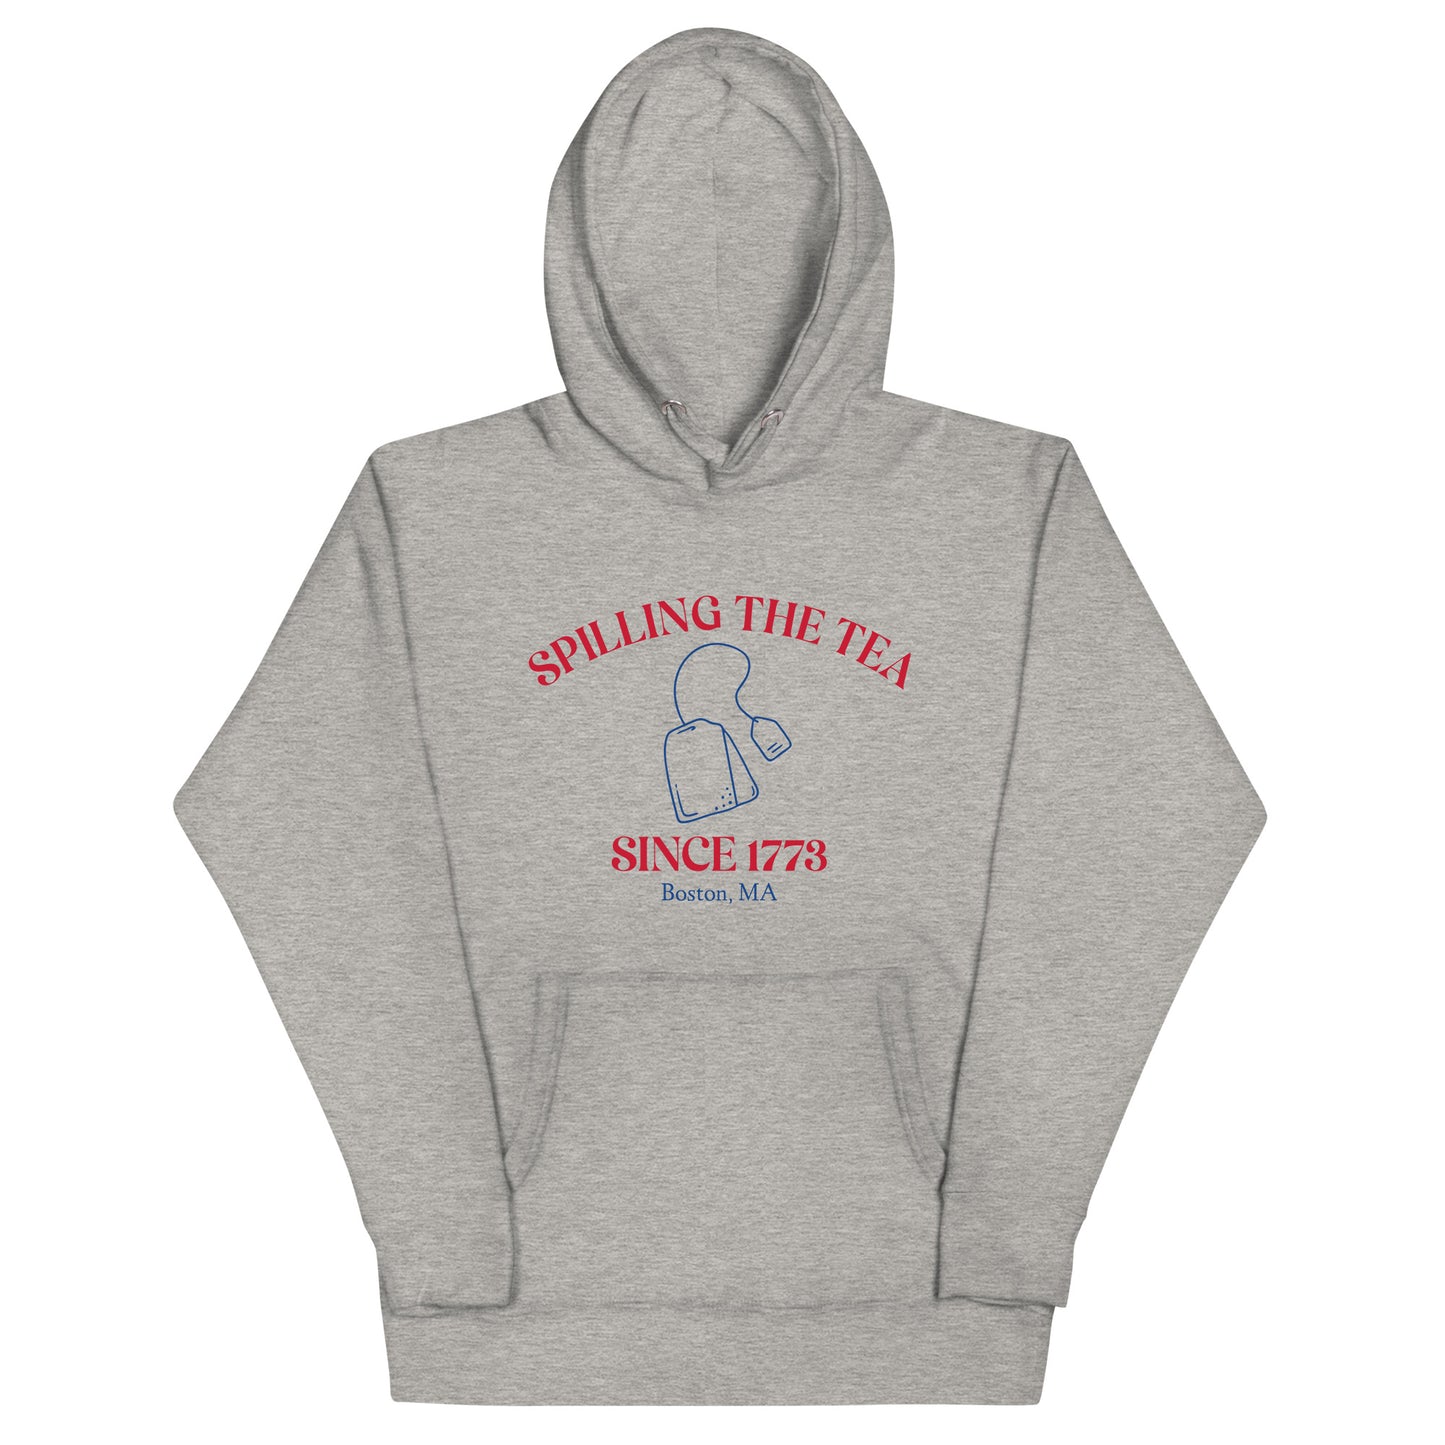 grey hoodie that say "spilling the tea since 1773" in red lettering and "Boston MA" in blue lettering with tea bag graphic in middle